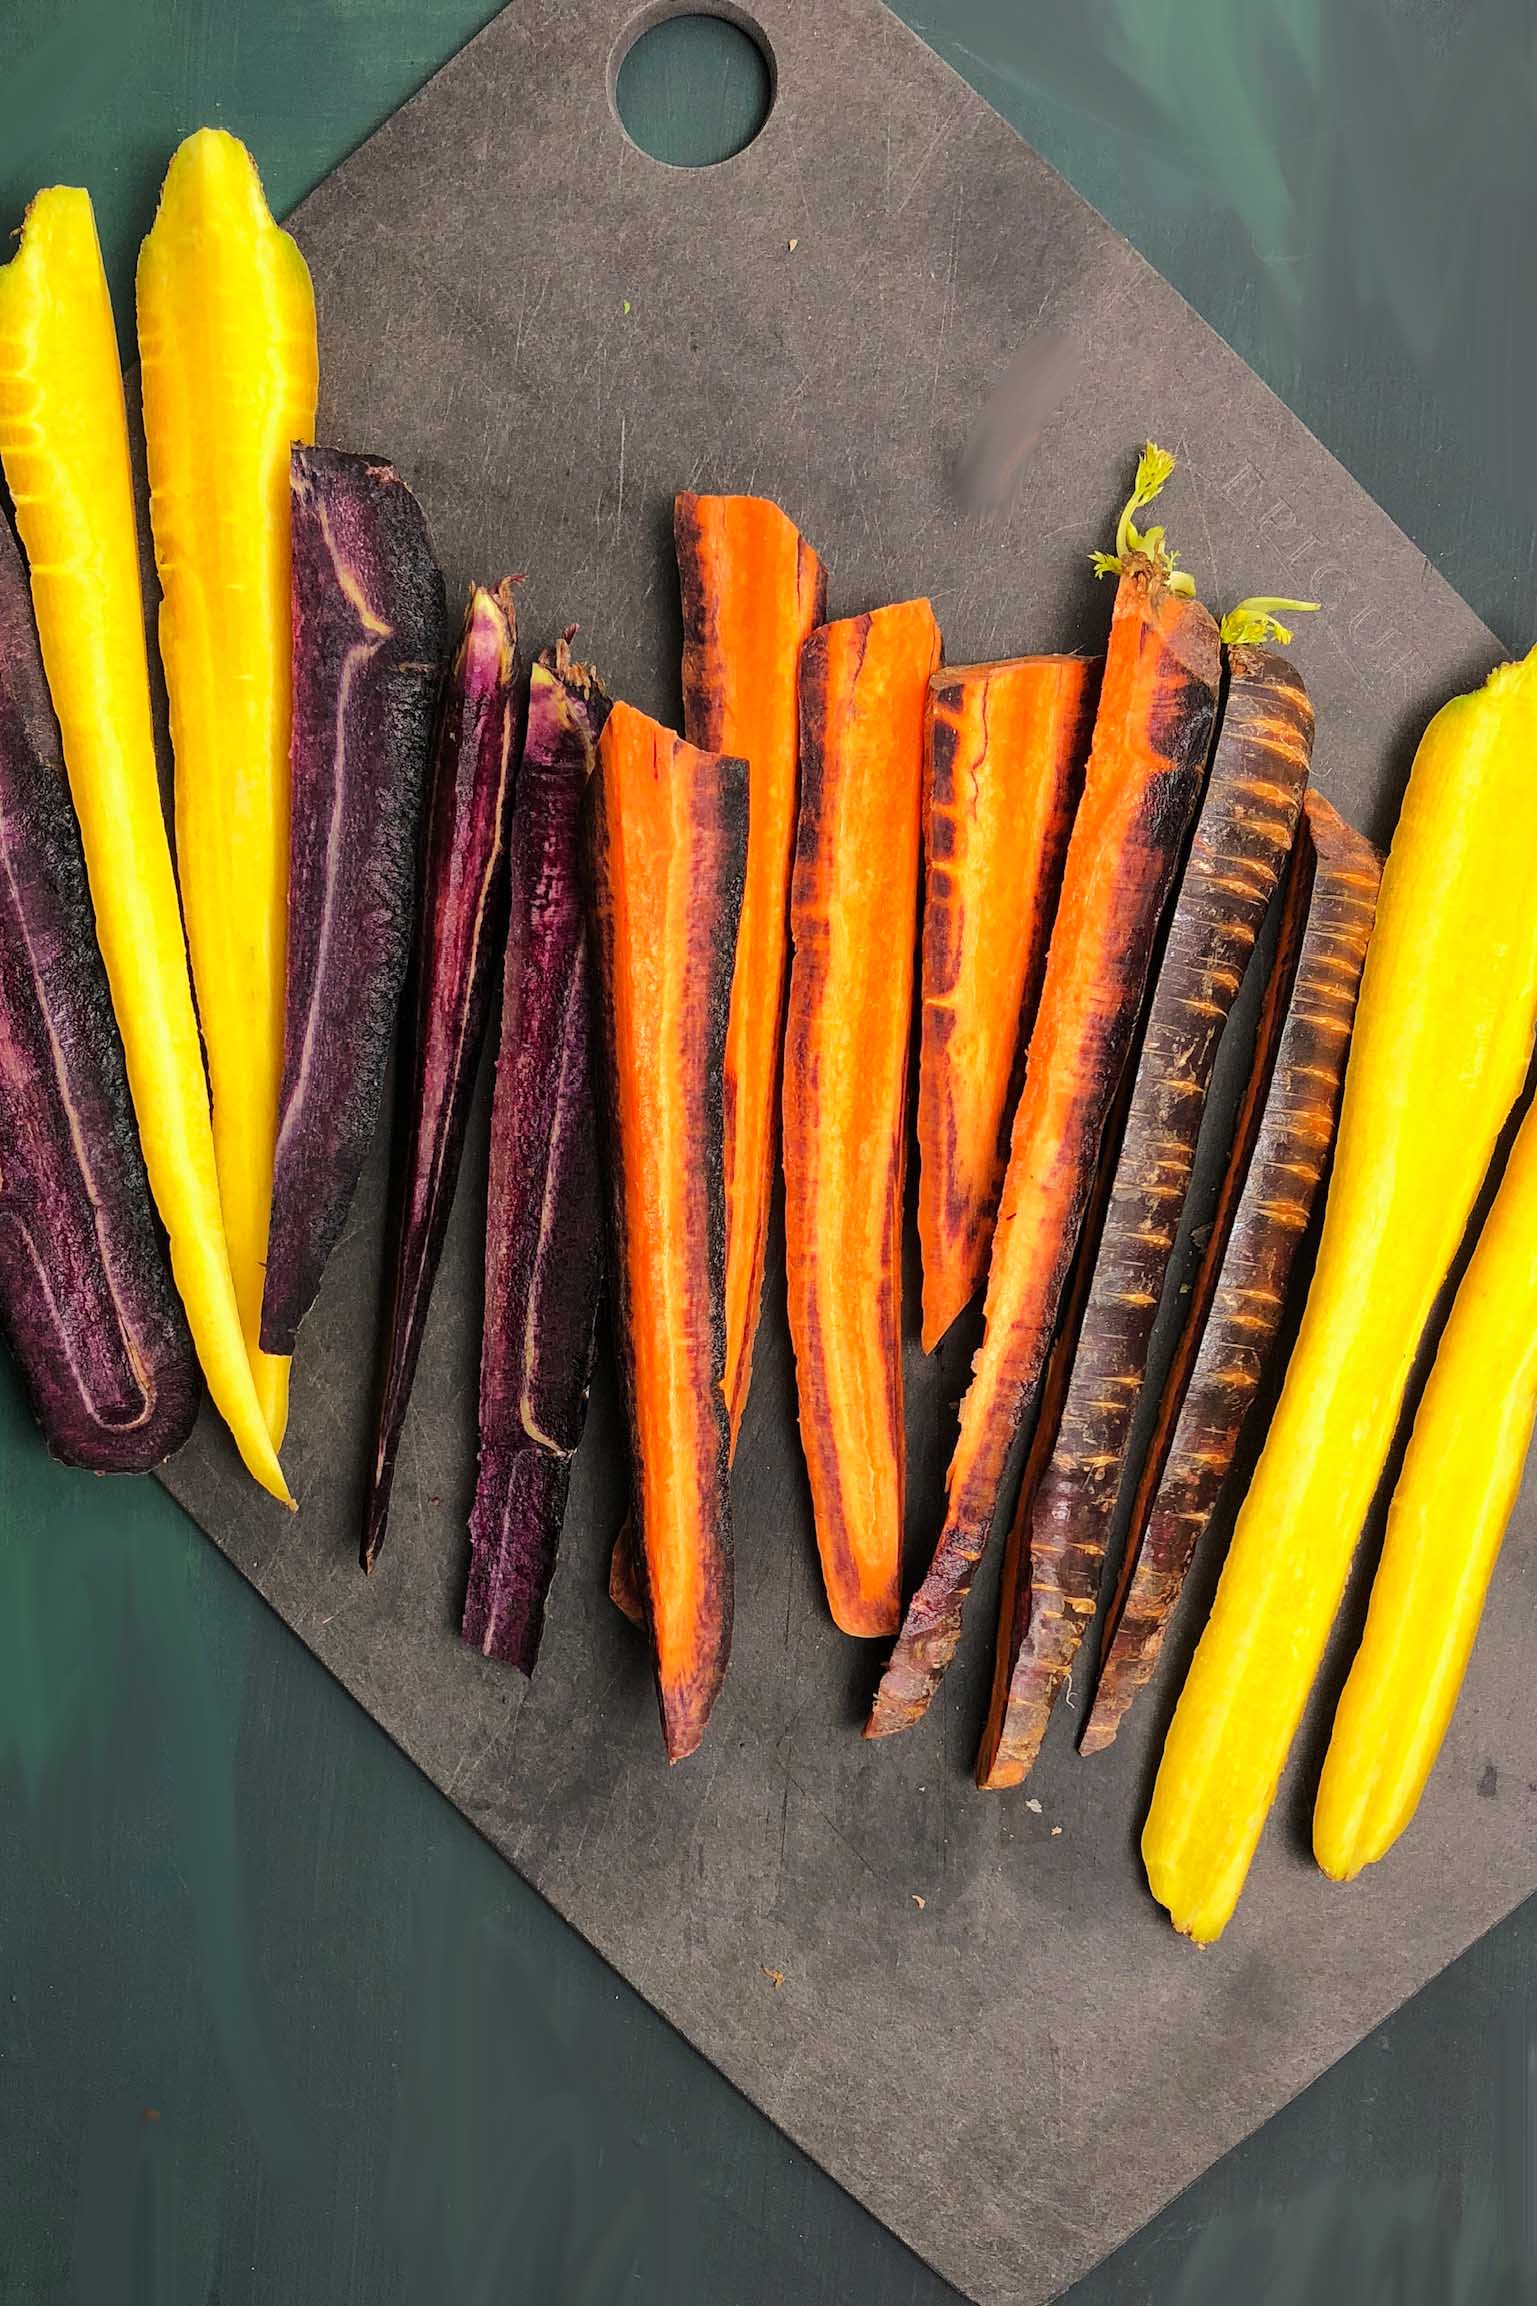 Sliced rainbow carrots on a cutting board. Carrots are yellow, orange, and purple.